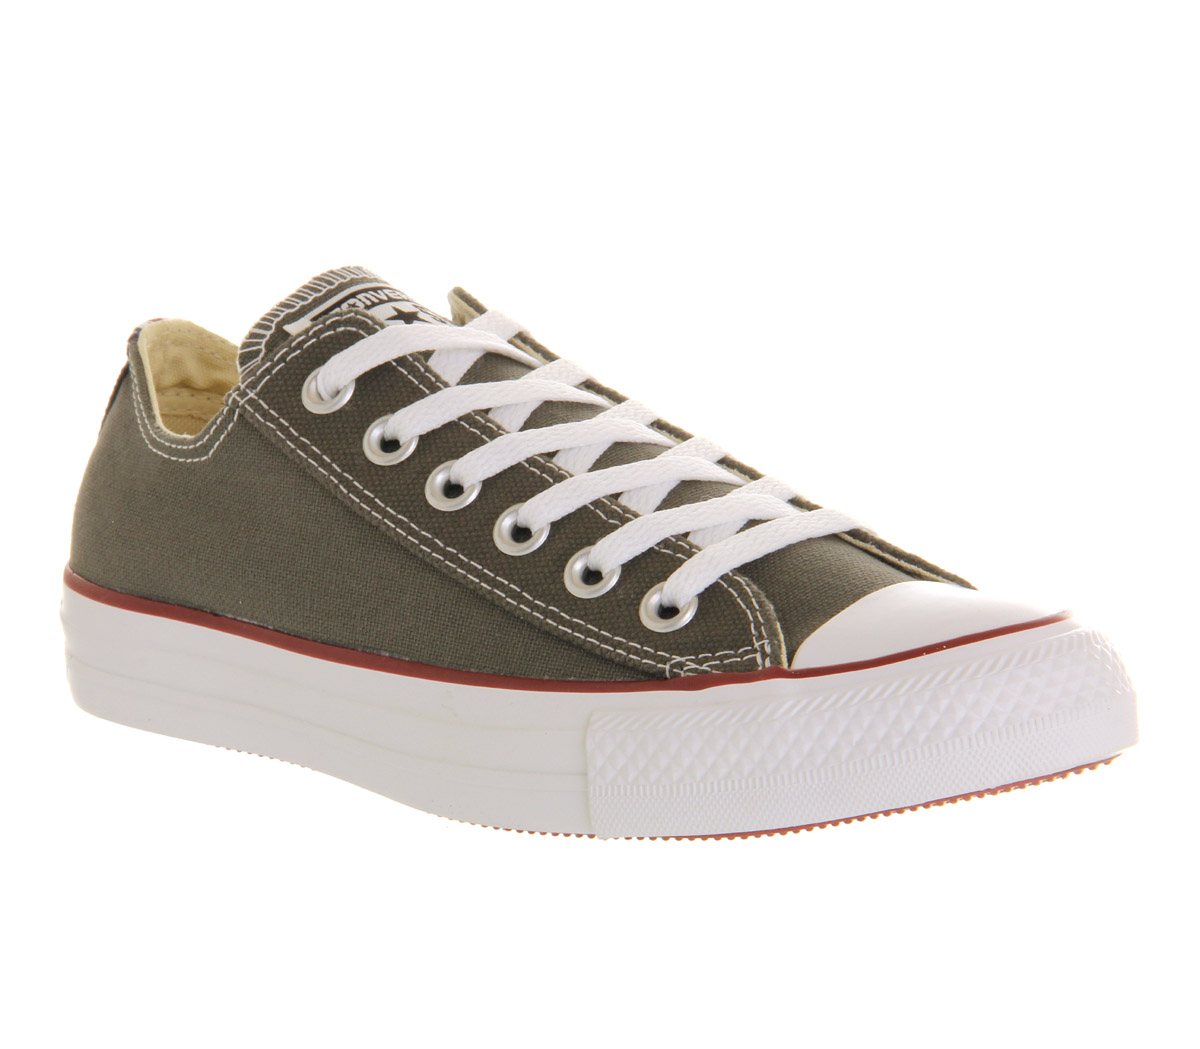 ConverseAll Star LowOverlay Charcoal Gooseberry